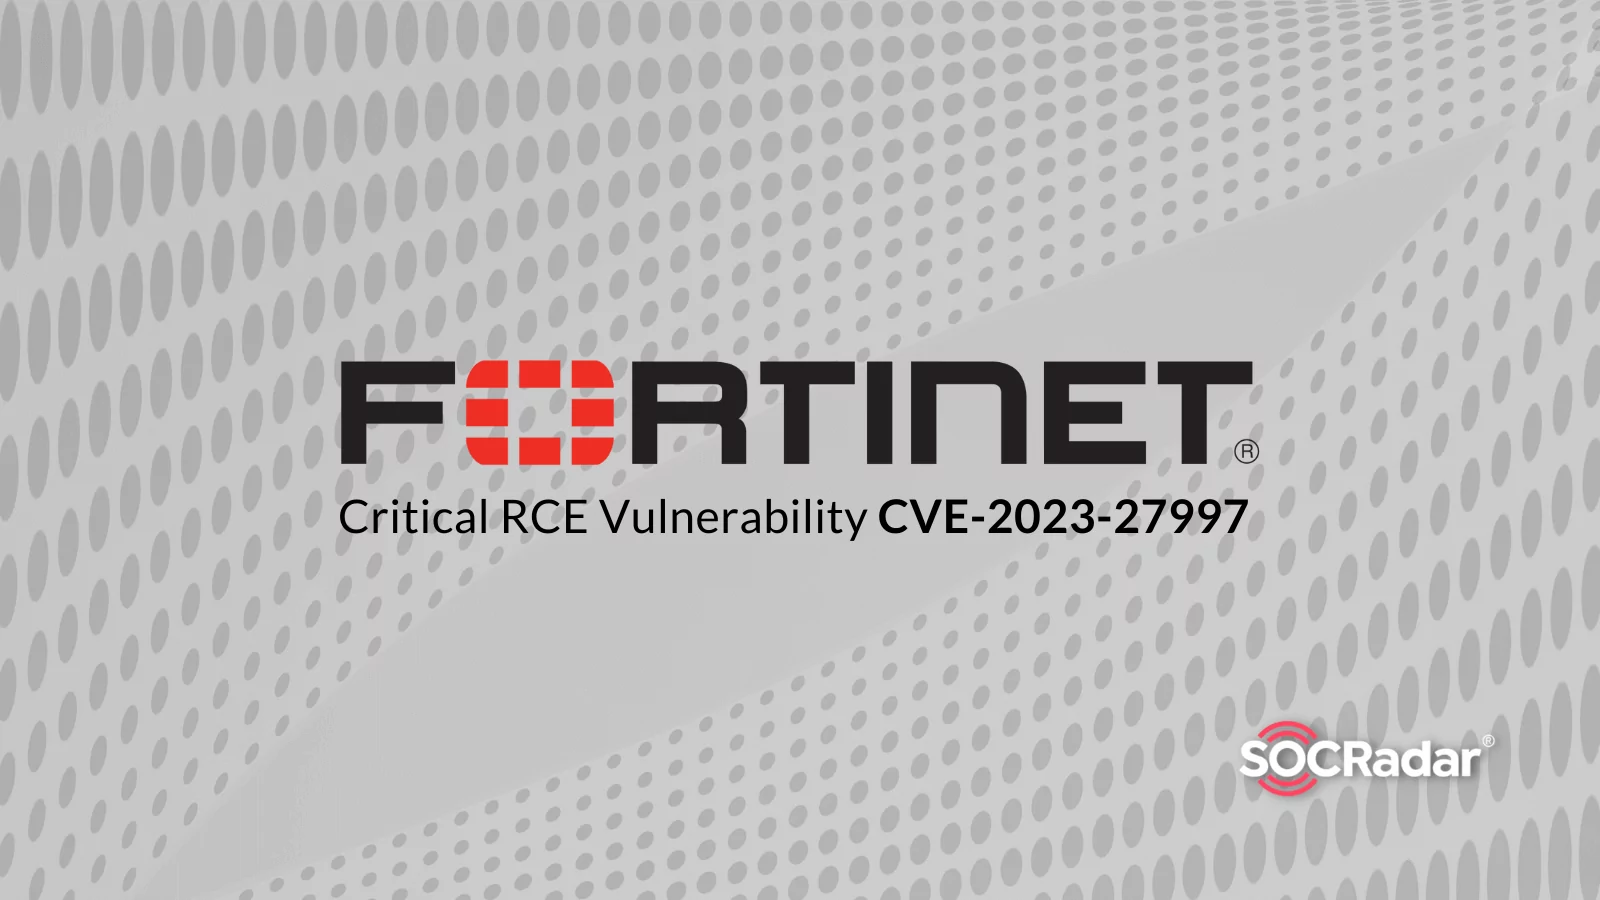 Rolls Out Patches for Critical RCE Vulnerability in SSL VPN